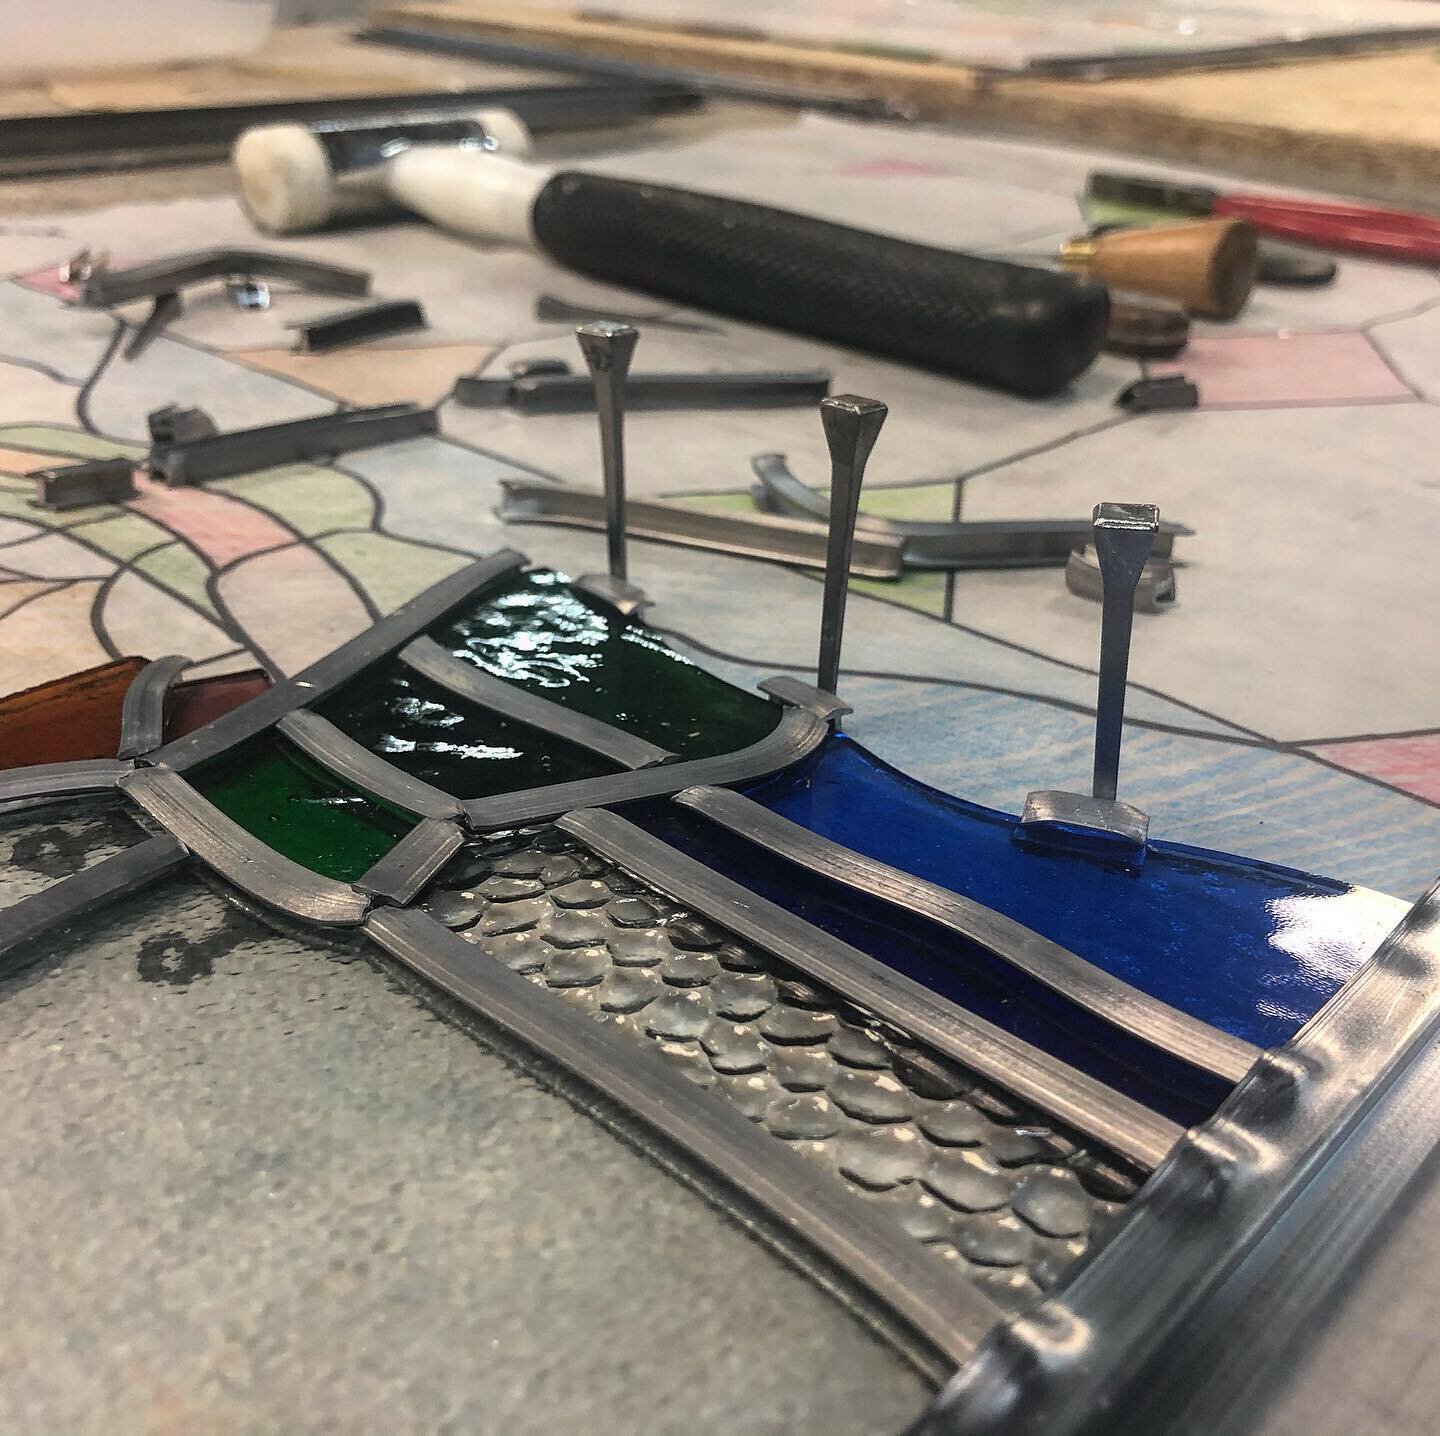 Some great colours being used in this new leaded light. Let us know what you think. #stainedglass #stainedglassart #leadedlights #lead #stainedglasswindow #glassart #crafts #workshop #glassblowing #glasspainting #leadedglasswindows #design #interiord